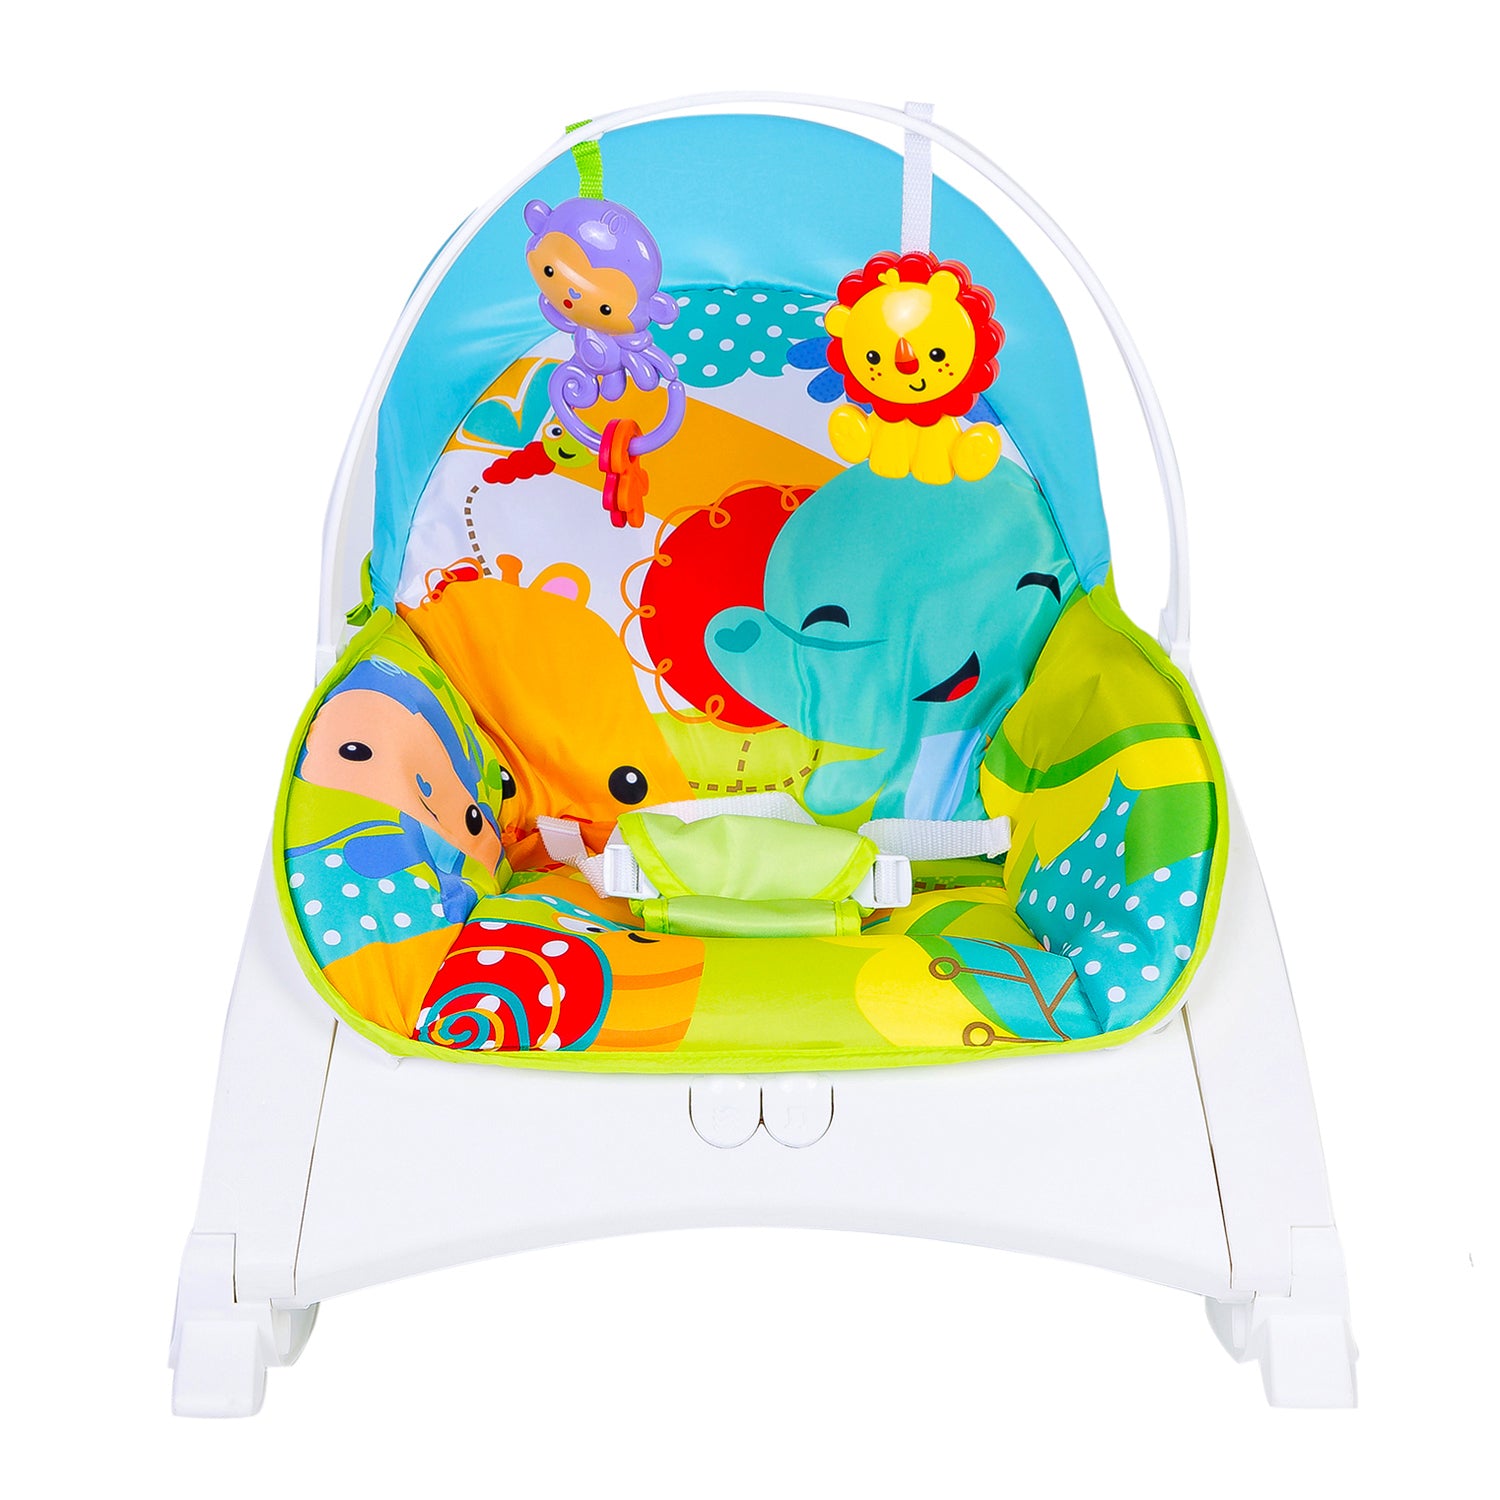 Newborn To Toddler Happy Baby Bouncer With Hanging Toys Green - Baby Moo